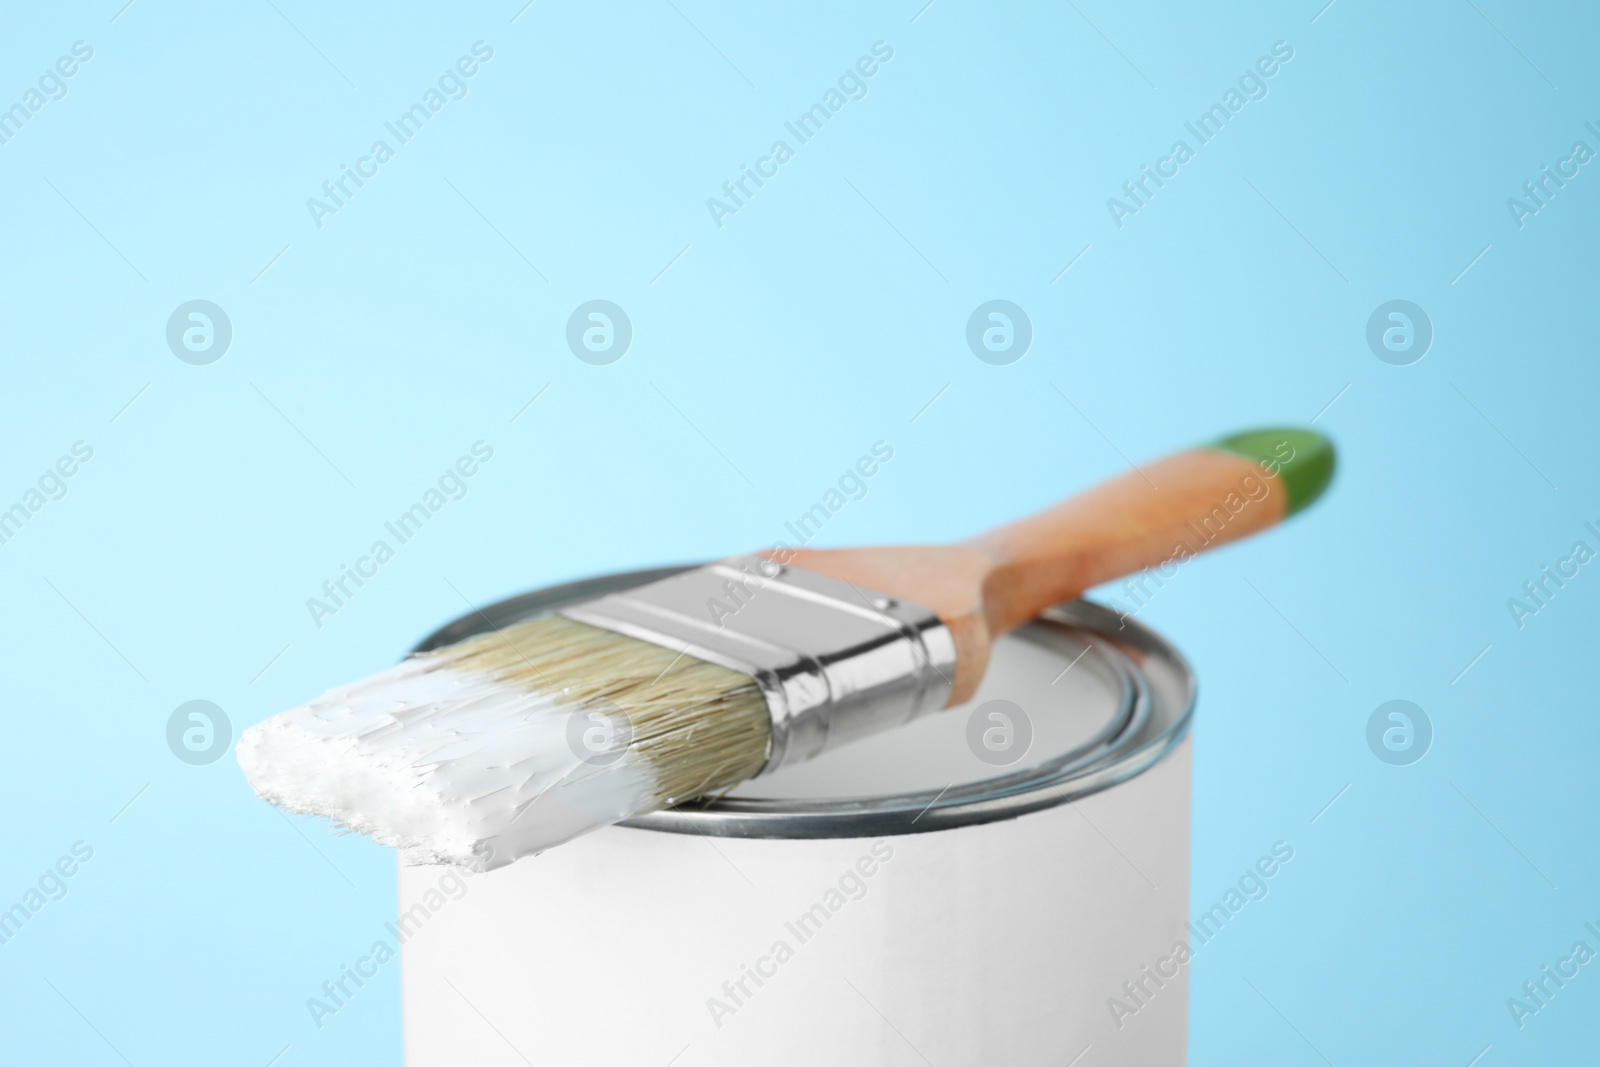 Photo of Can of white paint with brush on blue background